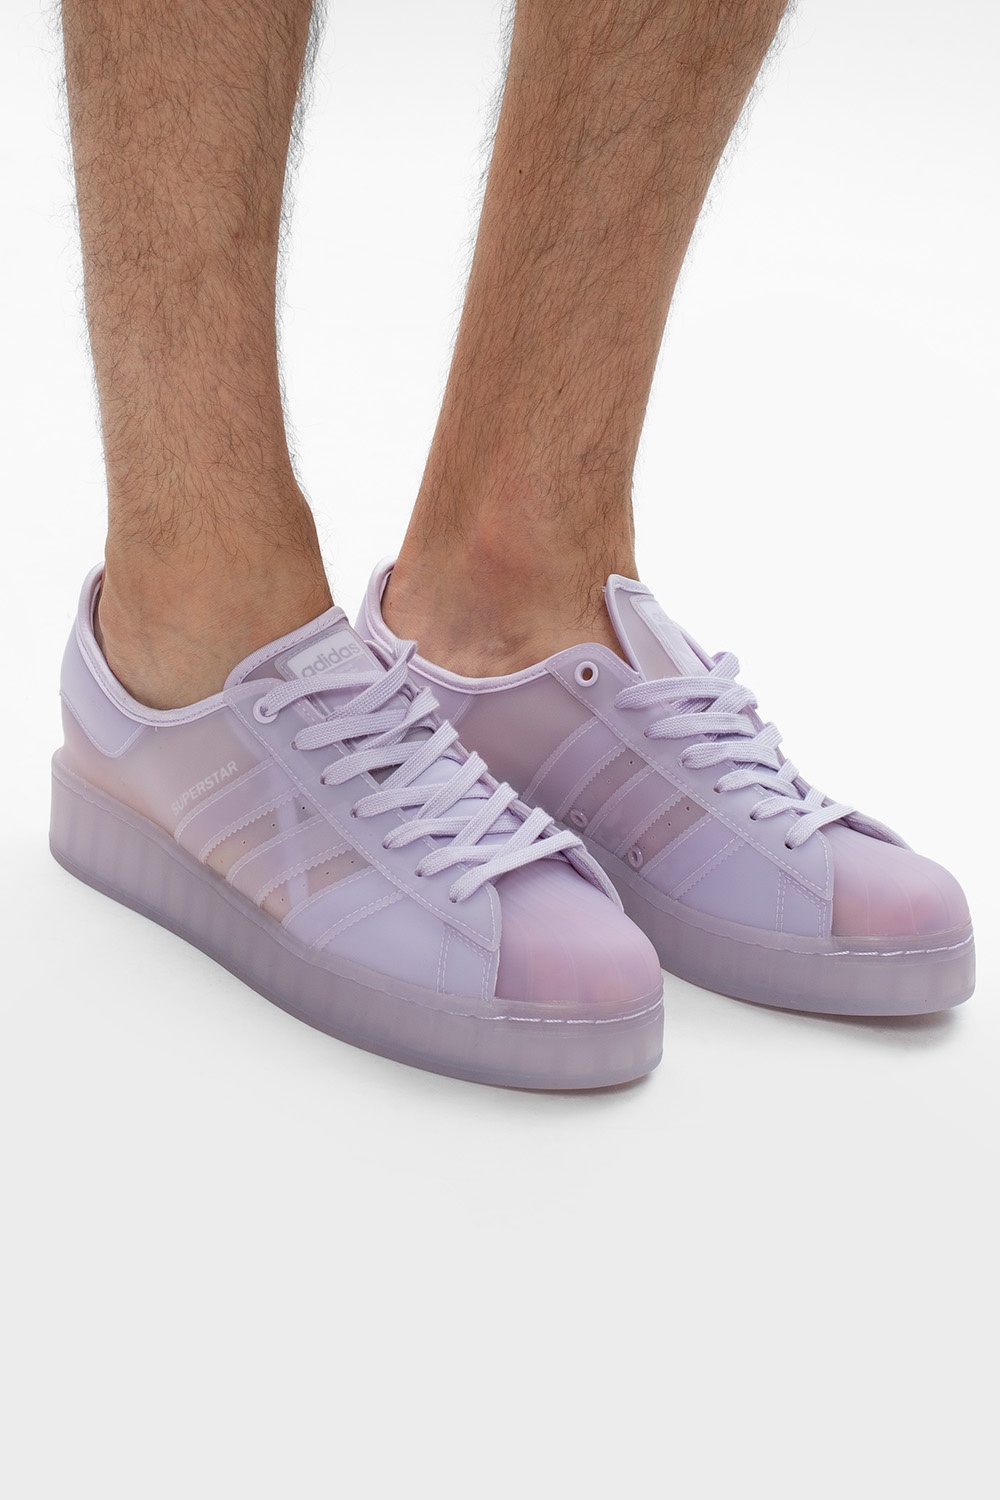 Superstar Jelly' sneakers ADIDAS 